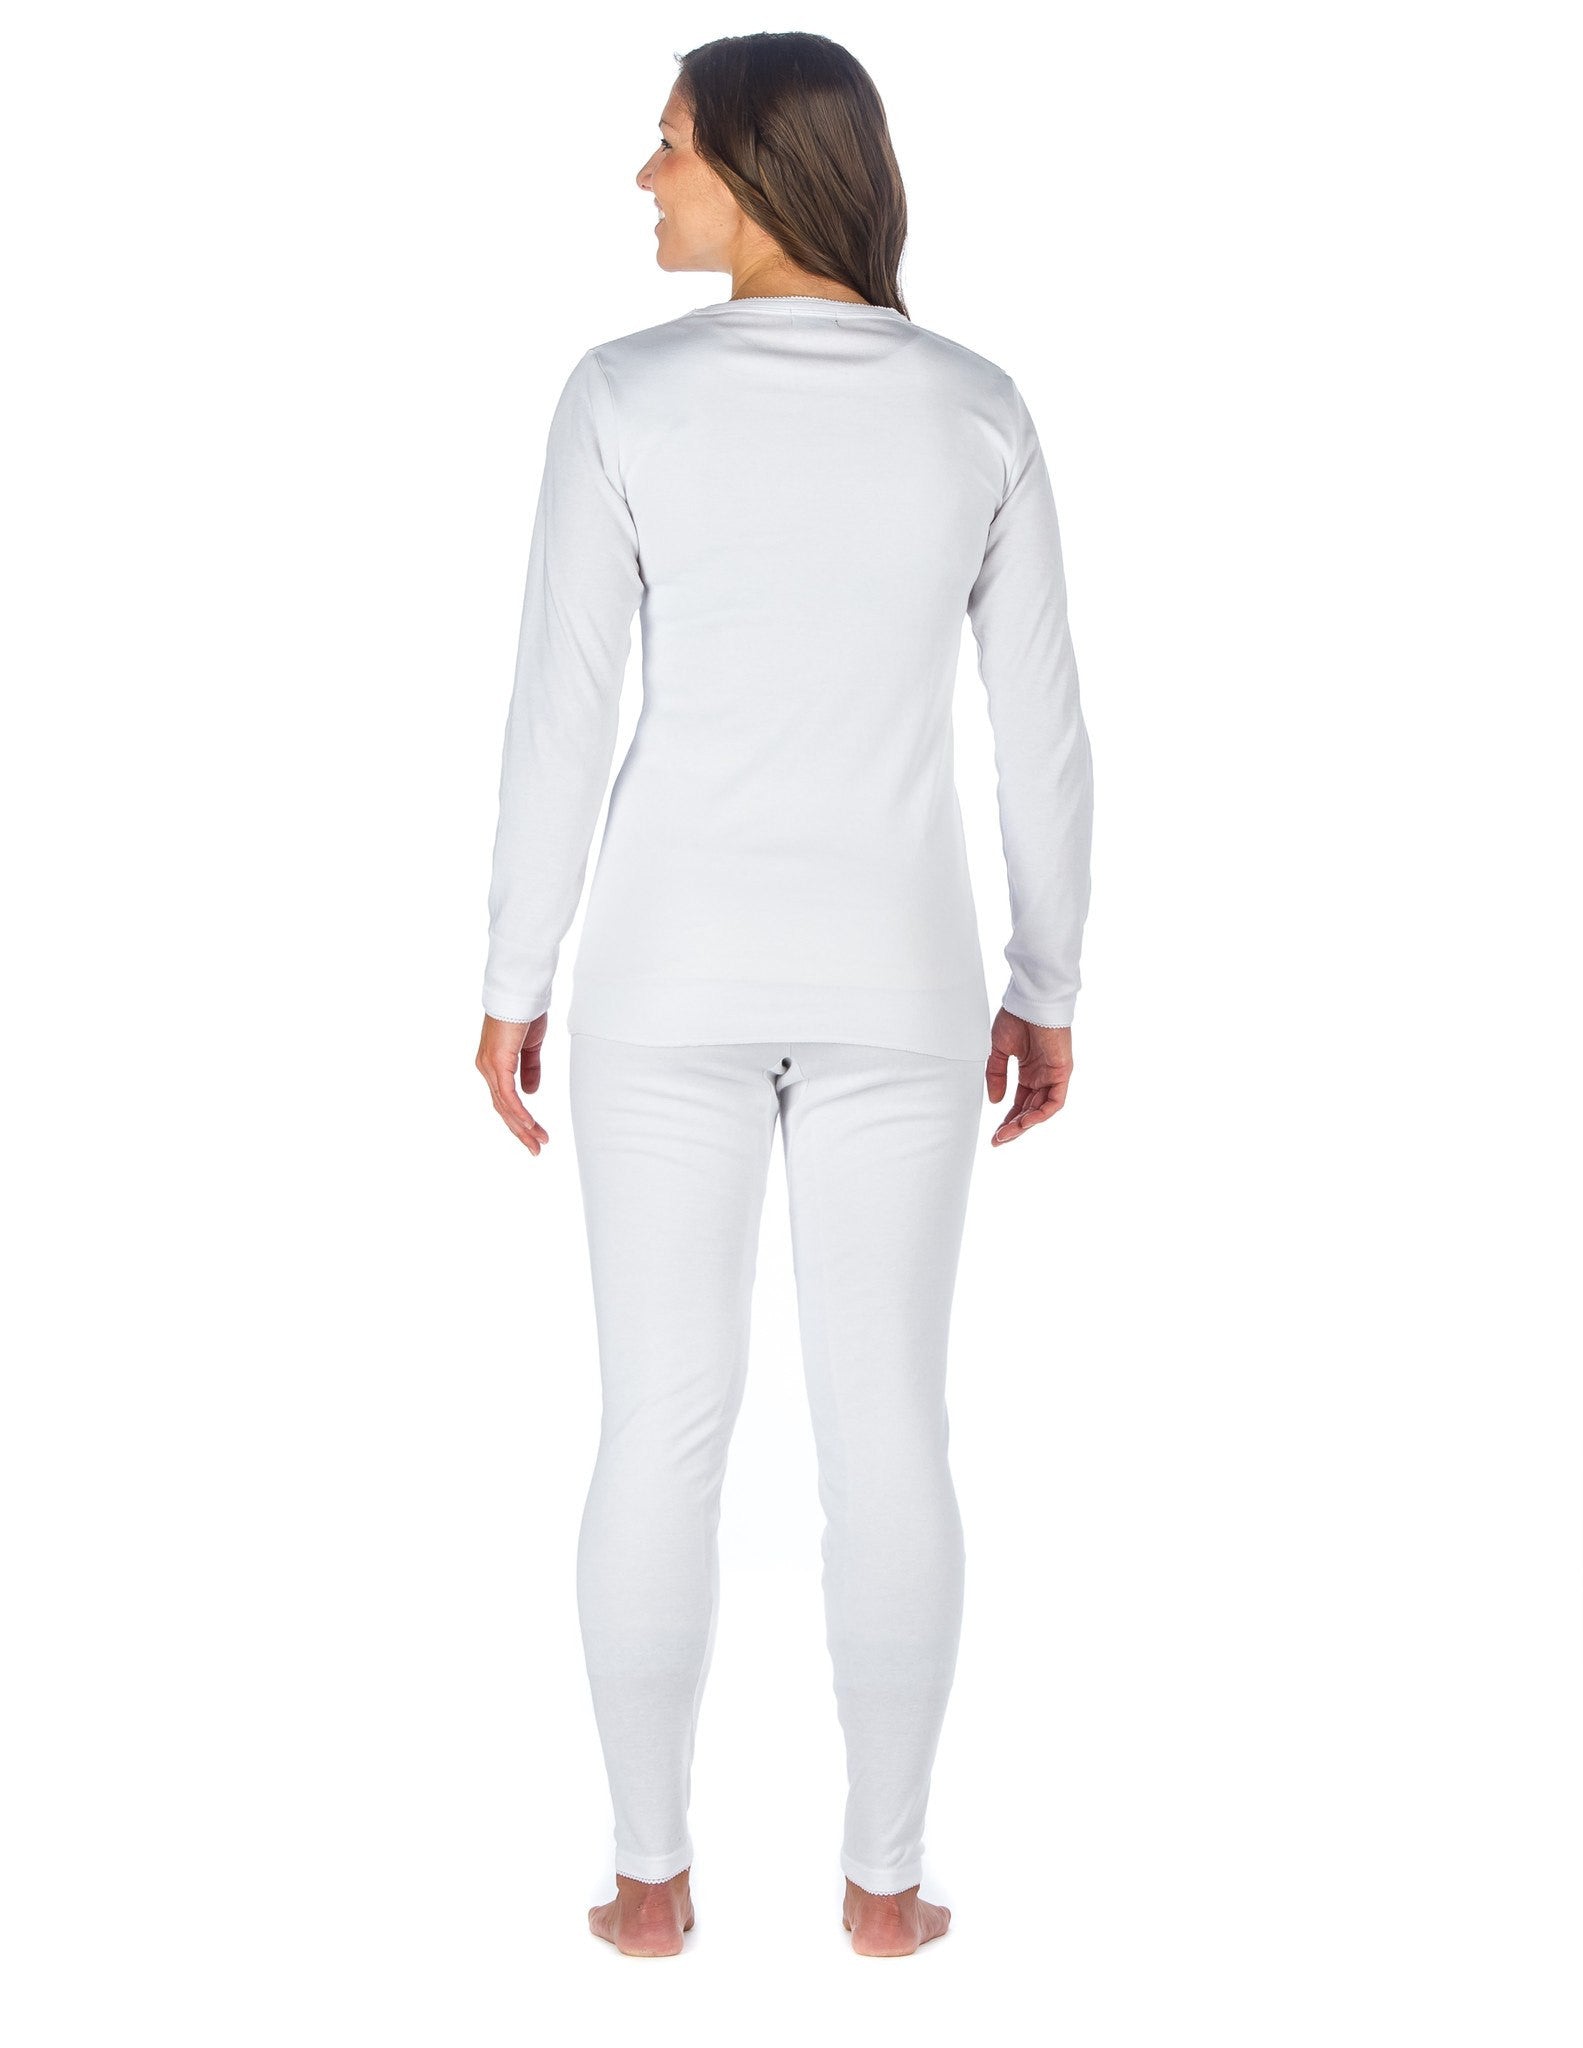 Noble Mount Women's 'Soft Comfort' Thermal Long Johns